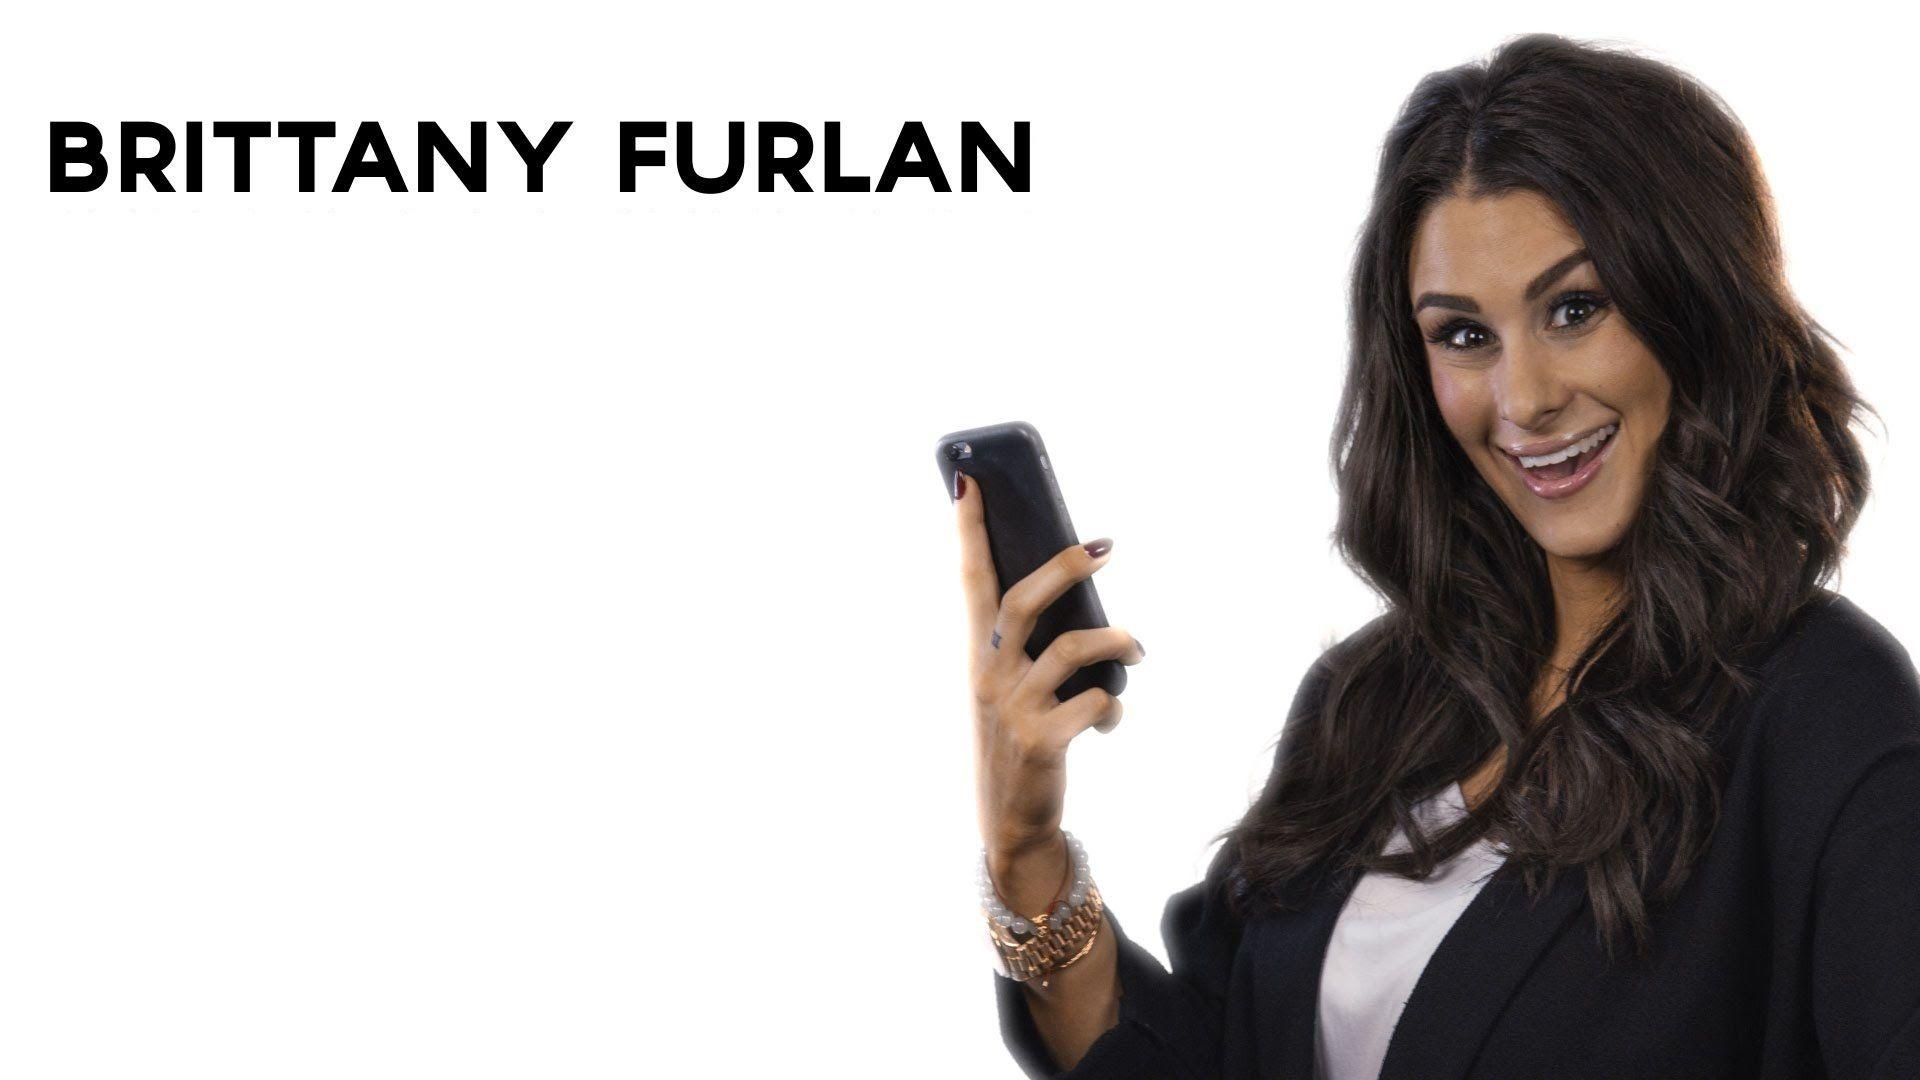 Brittany Furlan Wallpaper Image Photo Picture Background